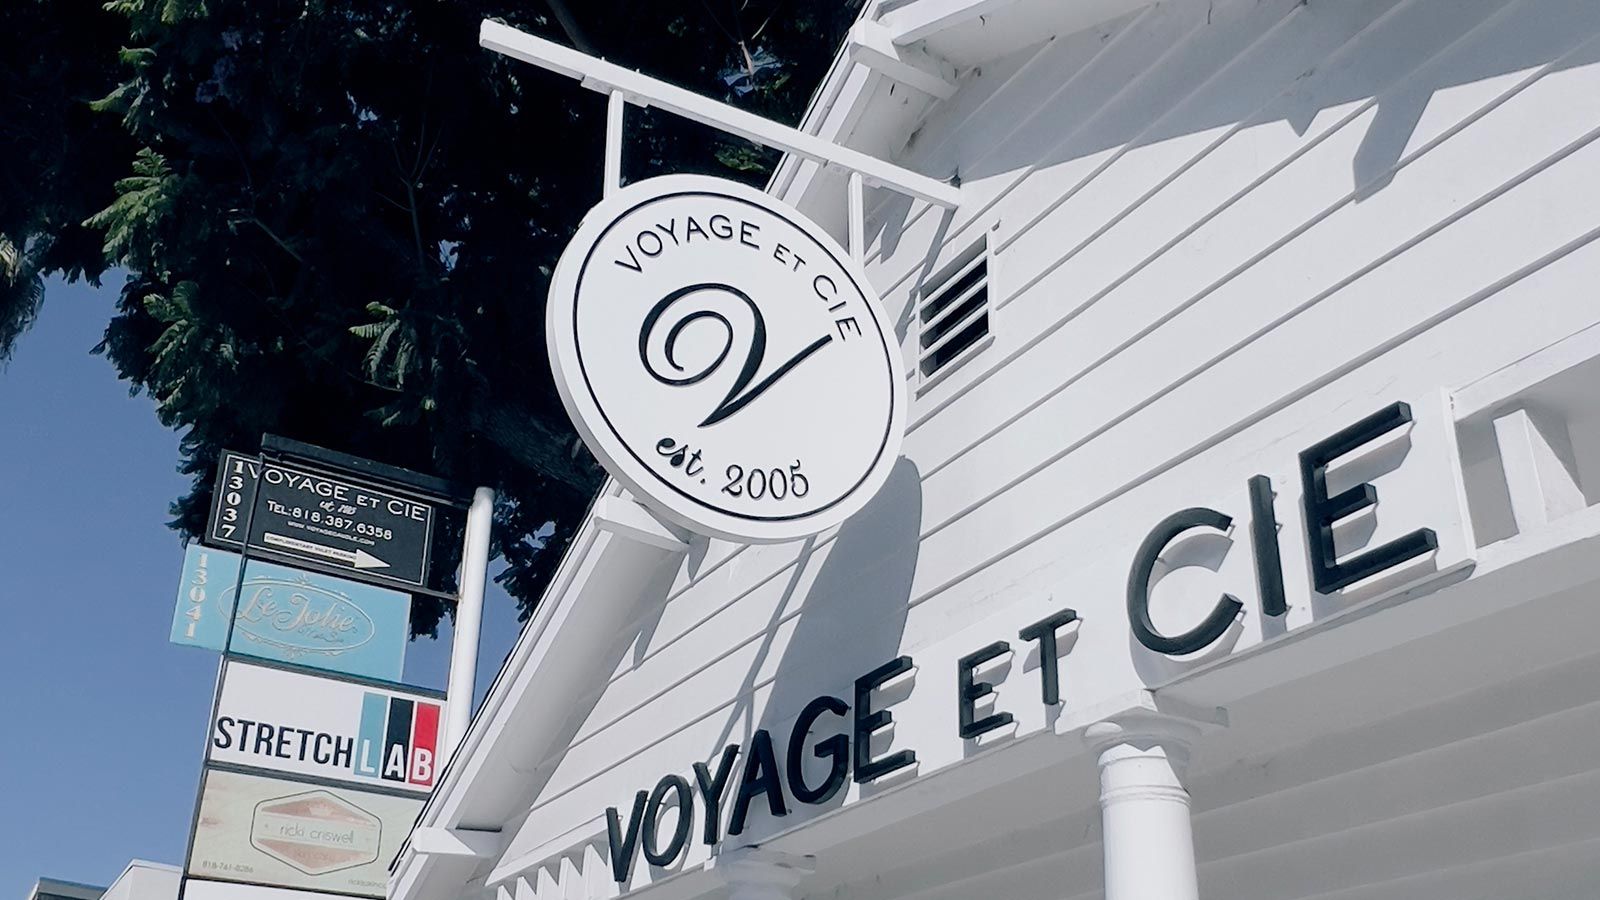 Voyage et Cie logo signs for the storefront branding